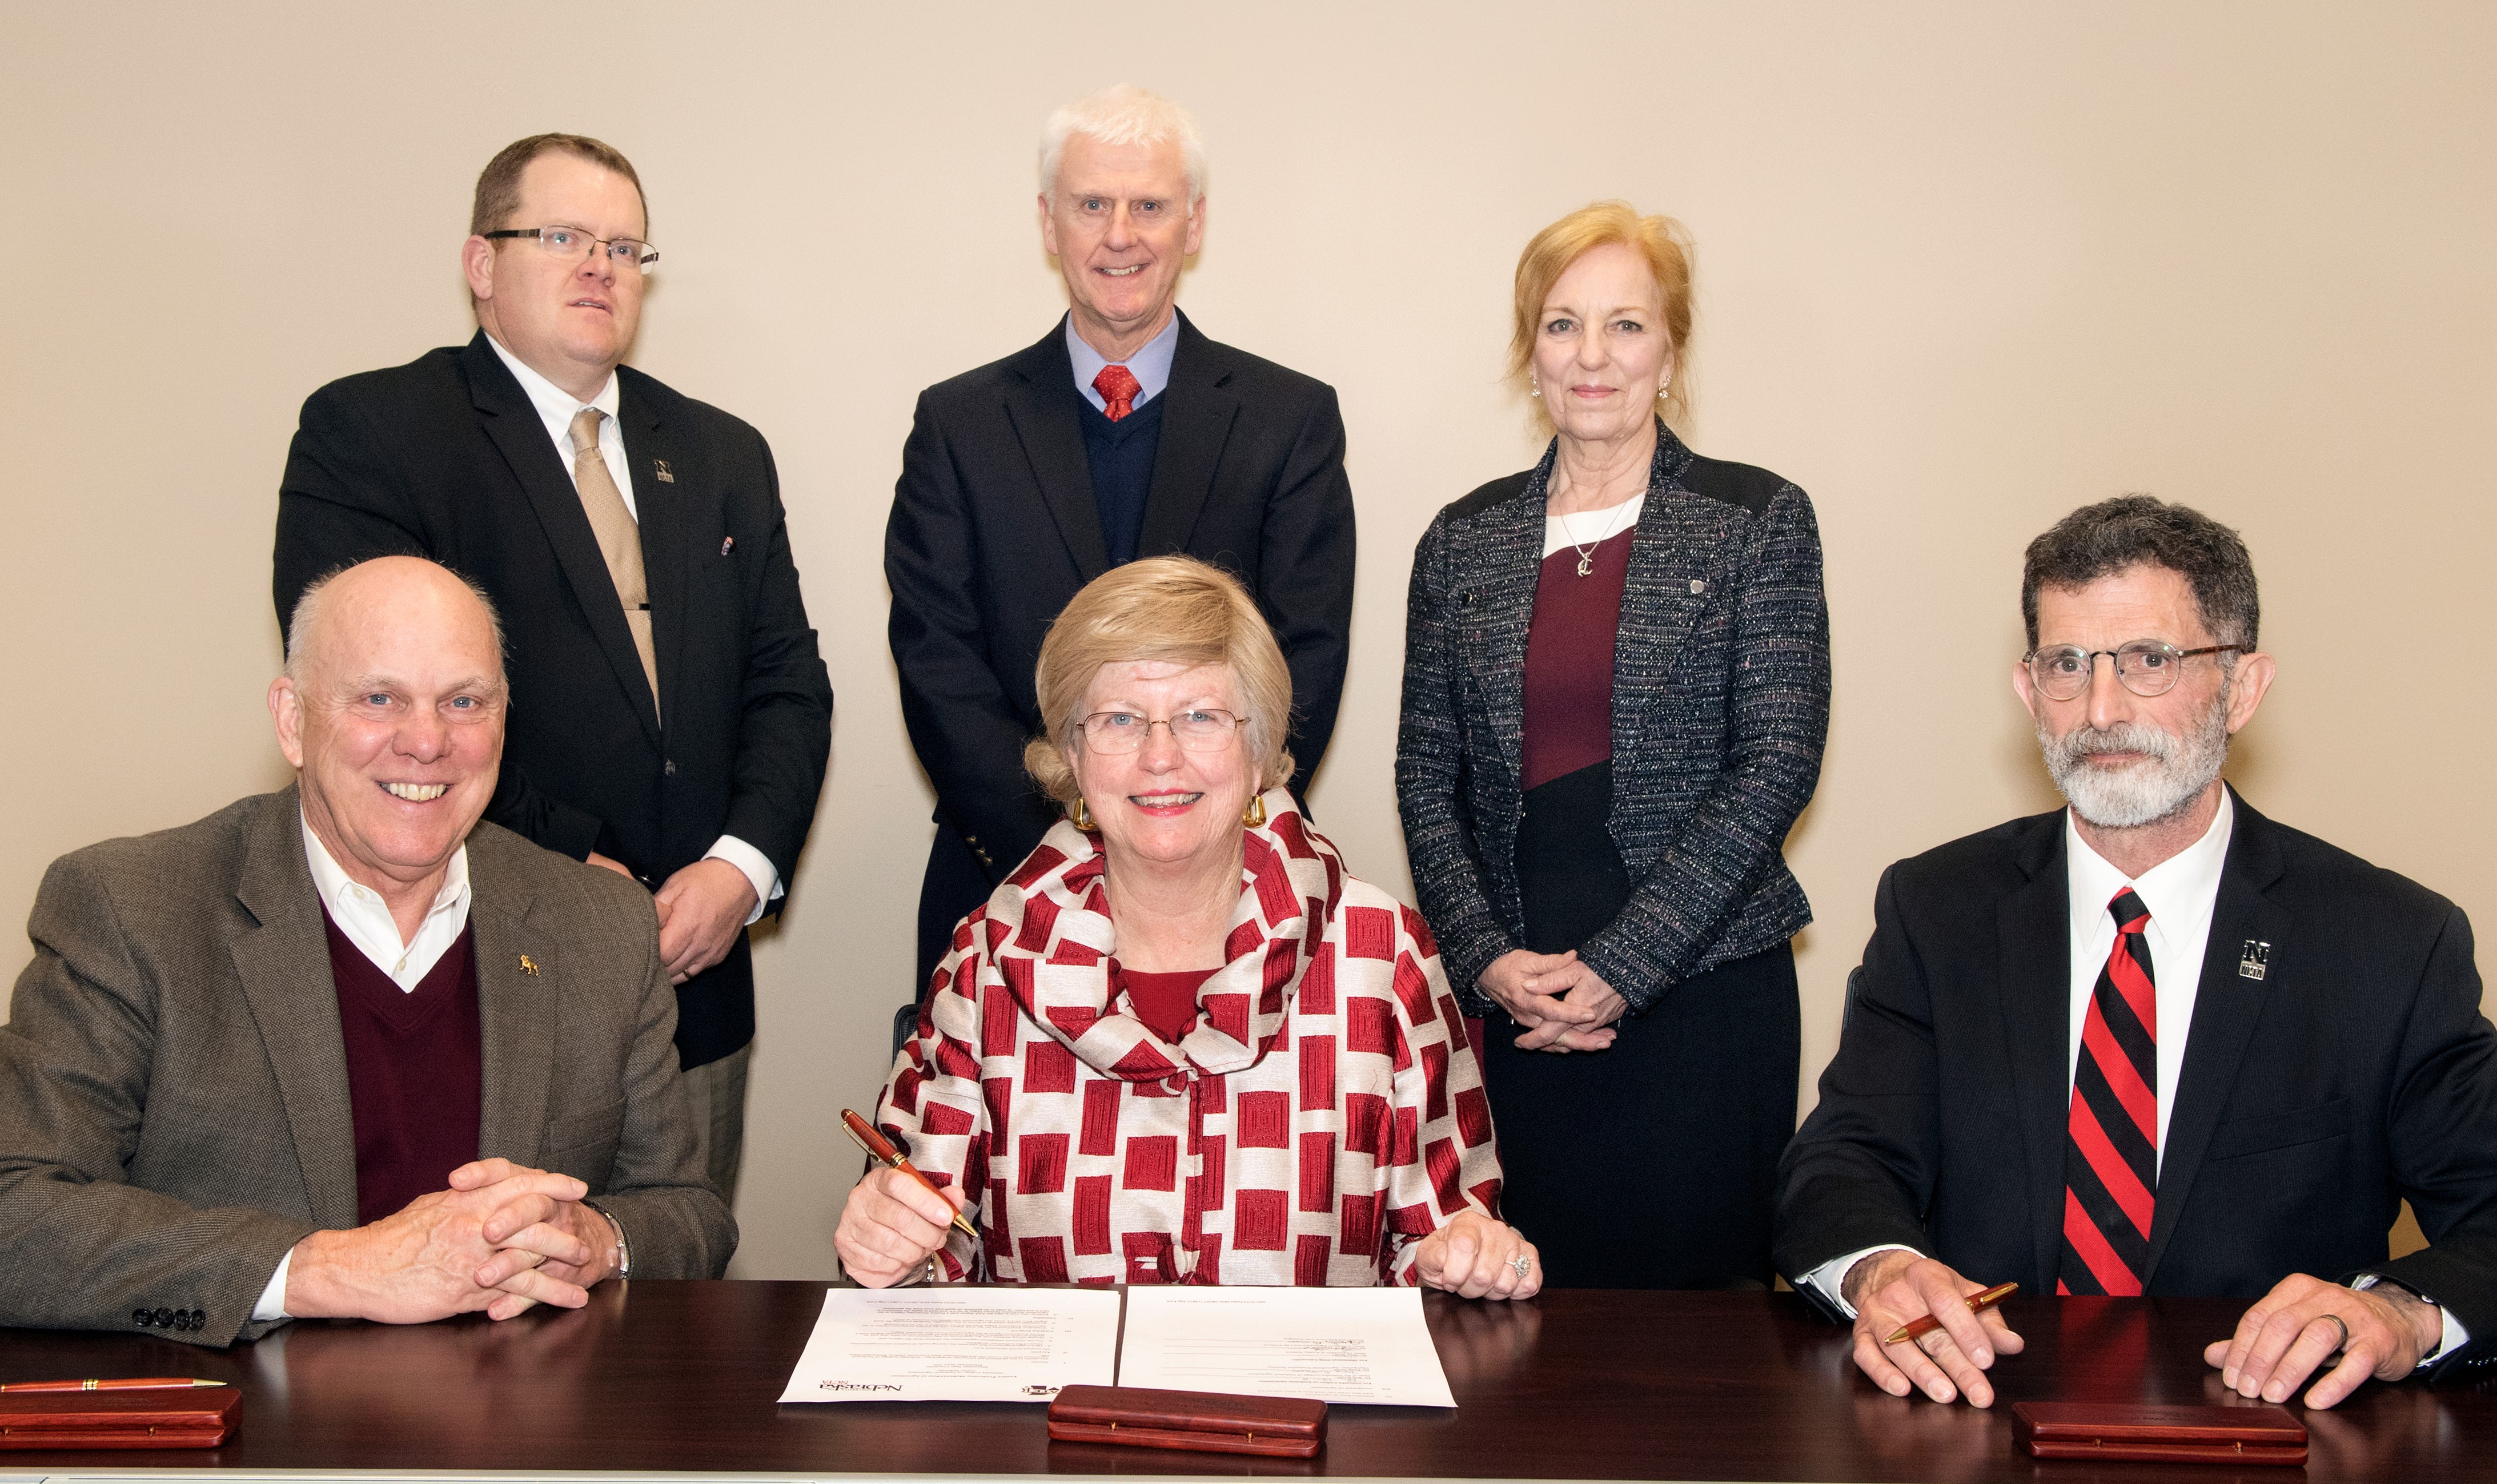 Attending the NCTA-MSU partnership signing are, (seated, left to right) George Hopper, dean of MSU's College of Agriculture and Life Sciences; Judy Bonner, MSU provost and executive vice president; and Ron Rosati, NCTA dean. (Standing, from left) Professor Doug Smith, chair of NCTA Animal Science and Agricultural Education; Peter Ryan, MSU associate provost for academic affairs; and Professor Mary Beck, head of MSU's Department of Poultry Science. (Photo by Beth Wynn/MSU)